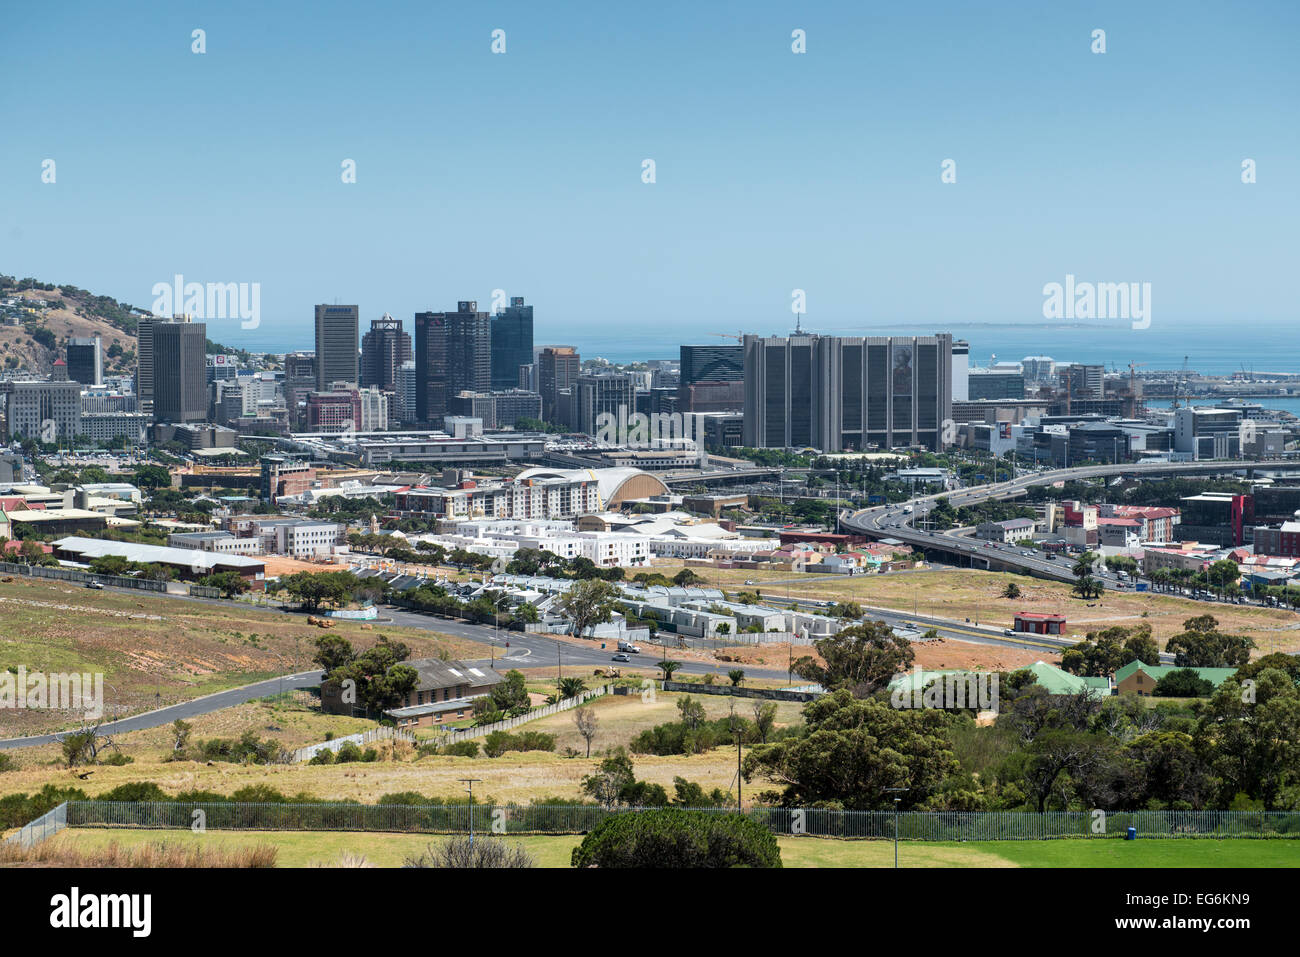 Cape Town city center and rebuilt District Six with grassland, view from M3 motorway, Cape Town, Western Cape, South Africa Stock Photo